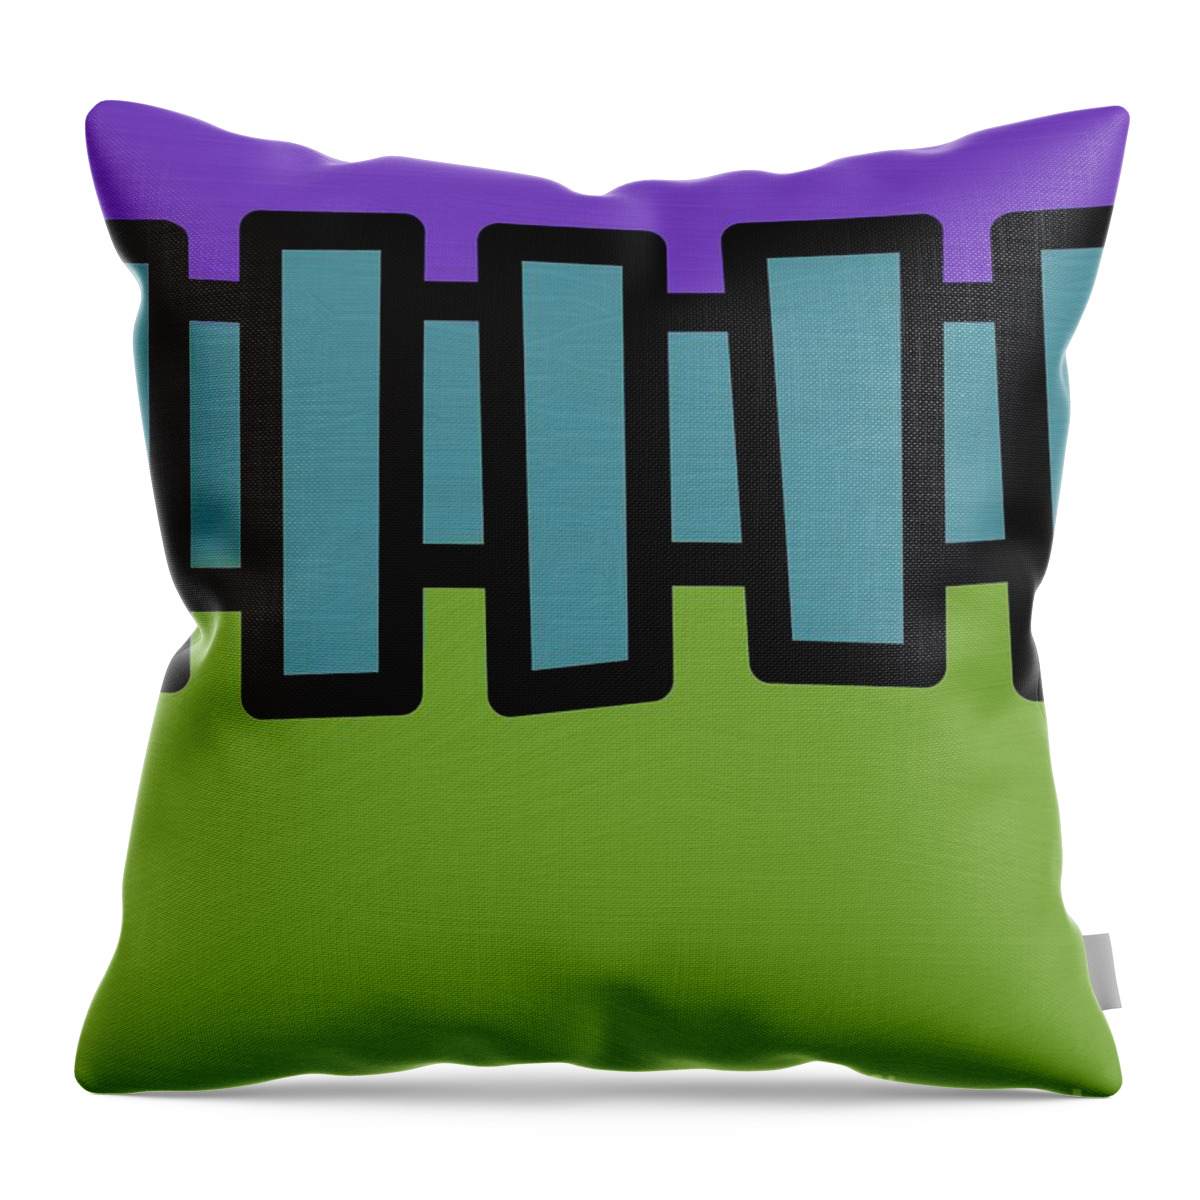 Retro Throw Pillow featuring the mixed media Retro Blue Rectangles by Donna Mibus